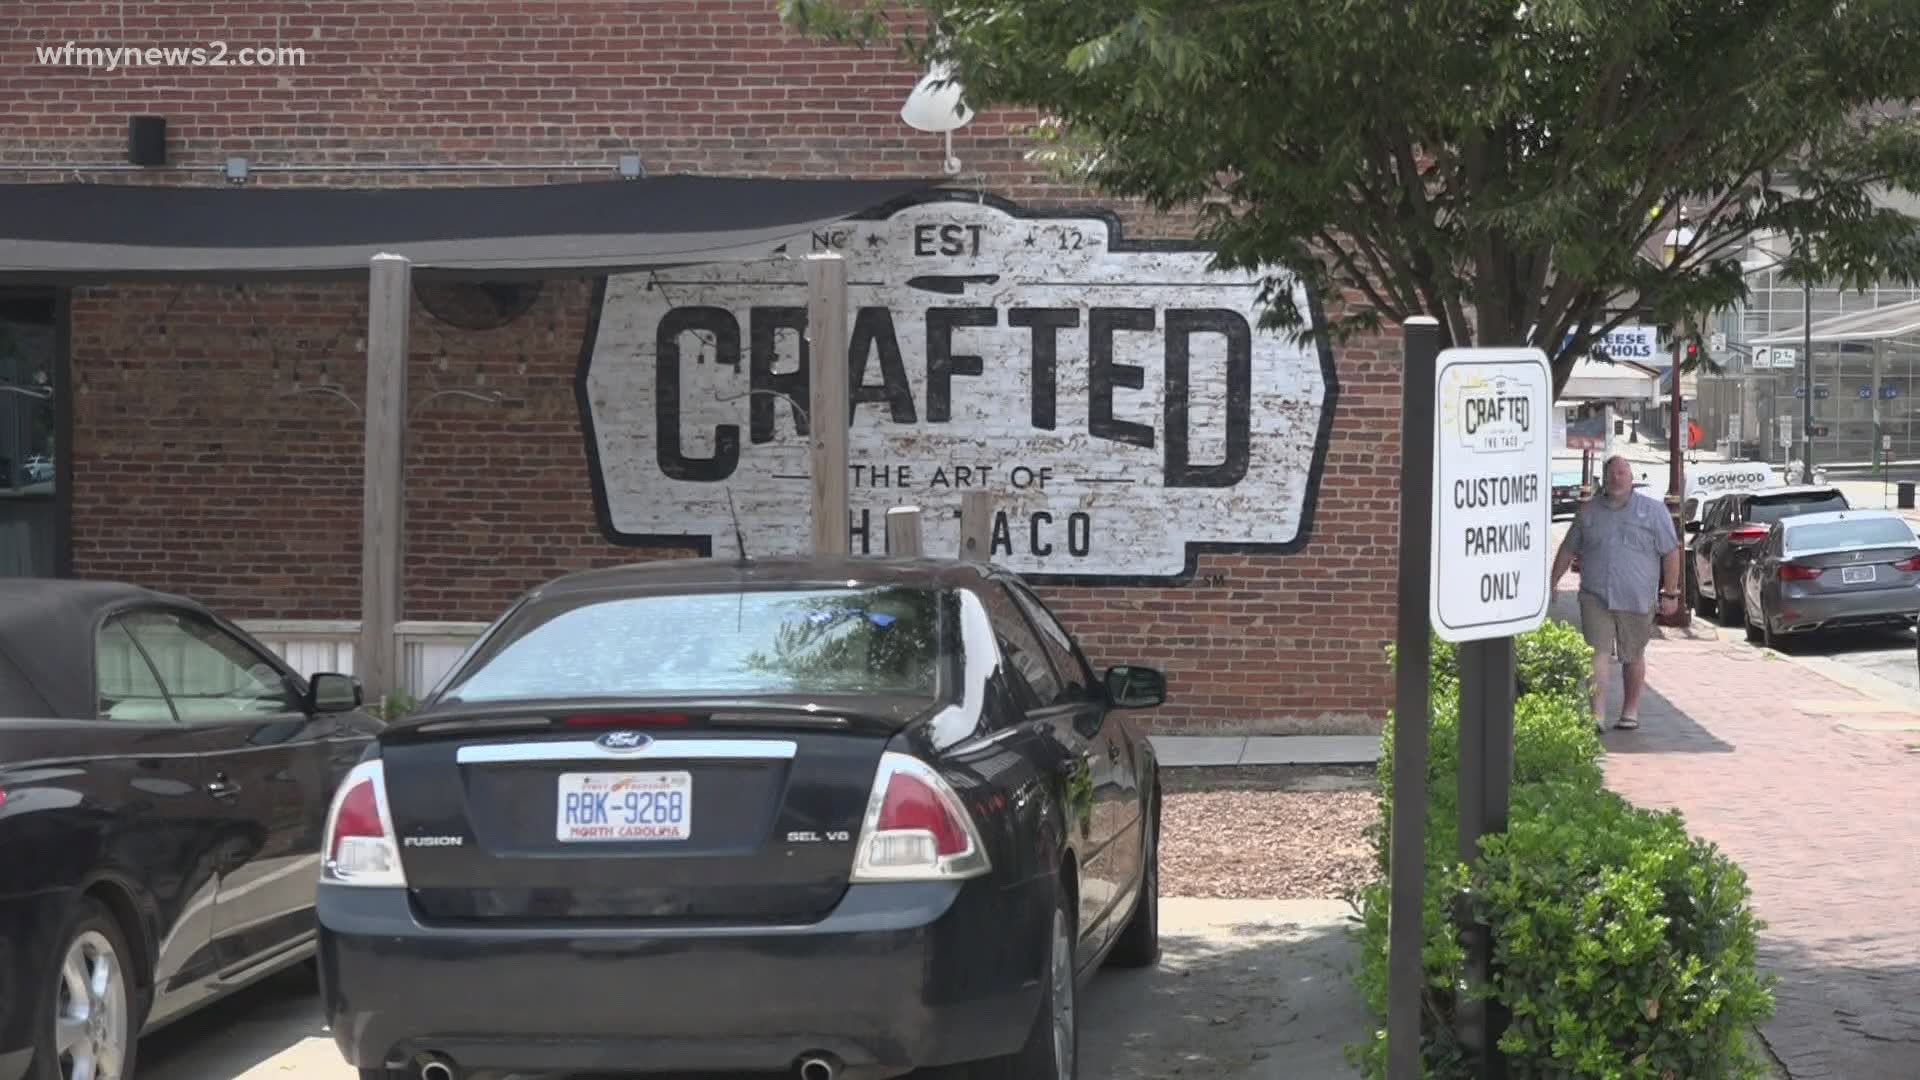 The owner of Crafted said many factors led to the closure, and that some employees lost their job while others transitioned to the other location in Greensboro.